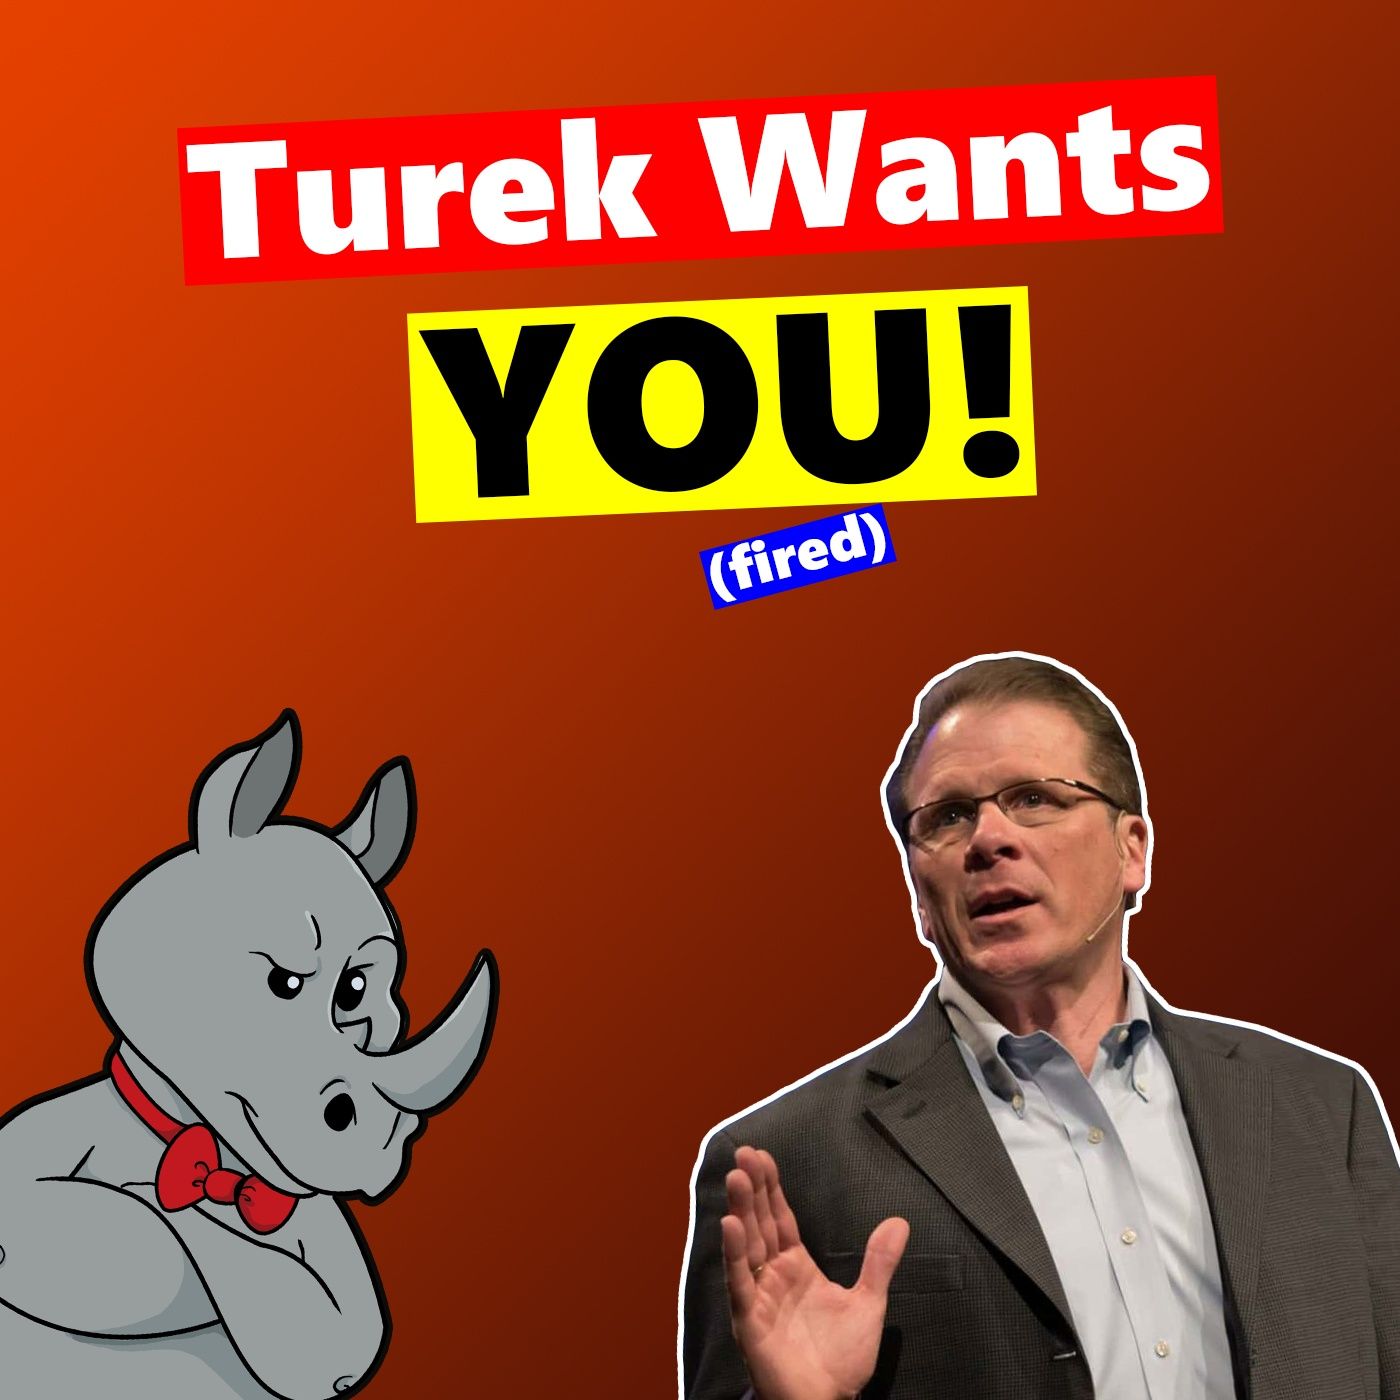 Turek Wants YOU To Get Fired To Make His Point For Him!